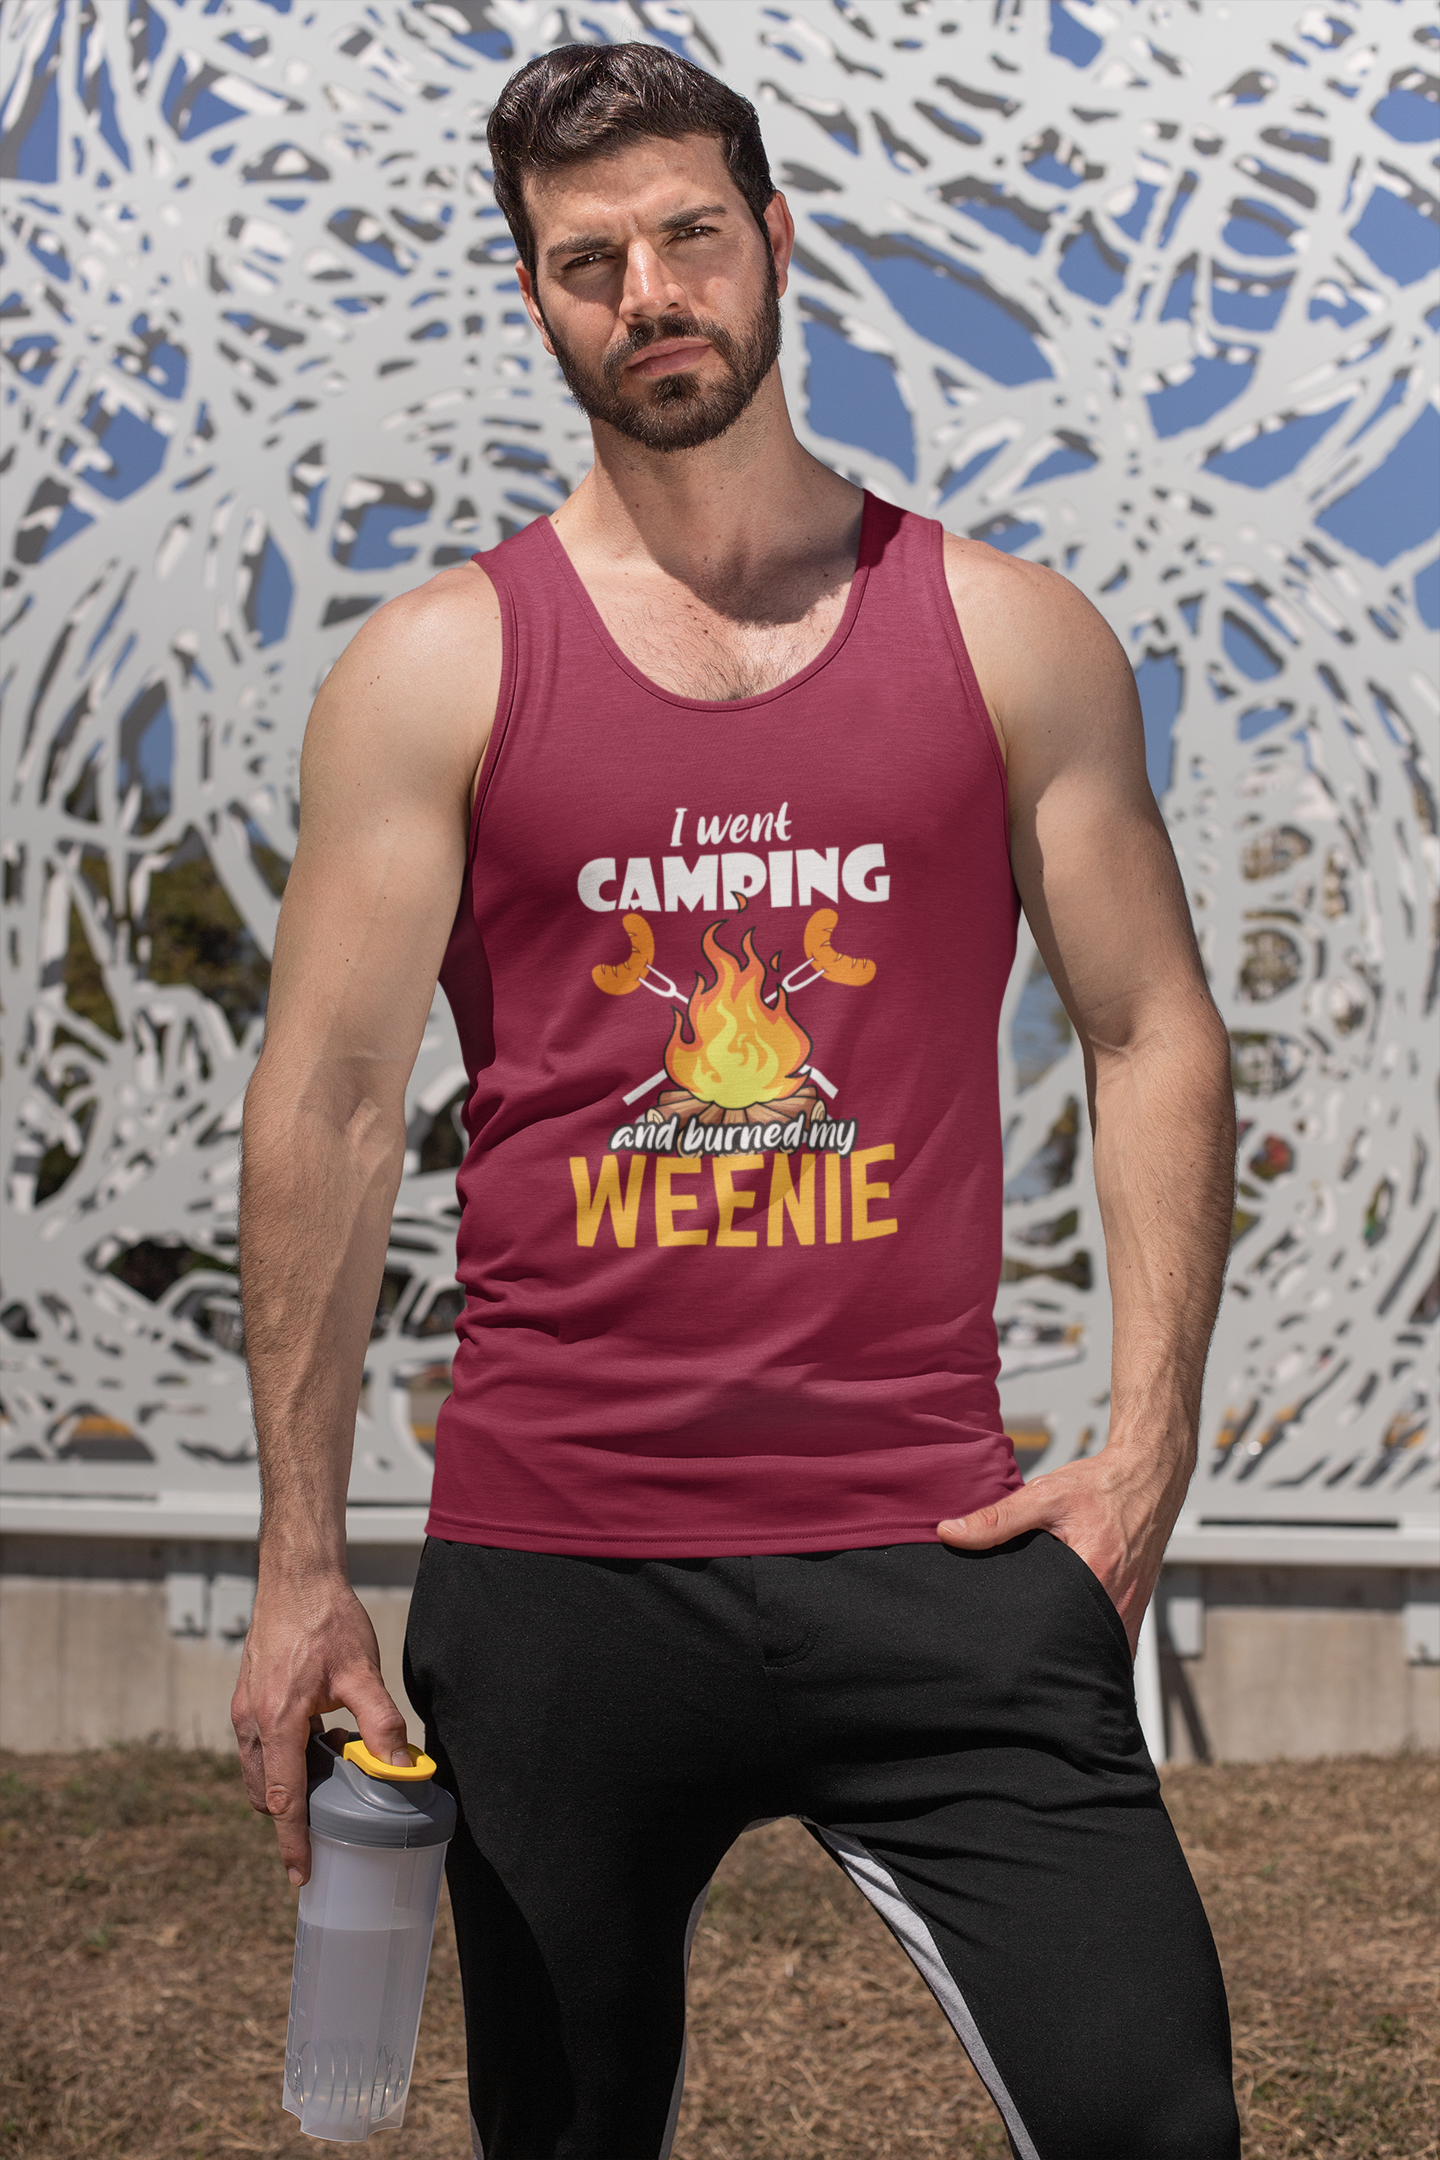 Burned my weenie; Soft 100% cotton tank top. Removable tag for comfort